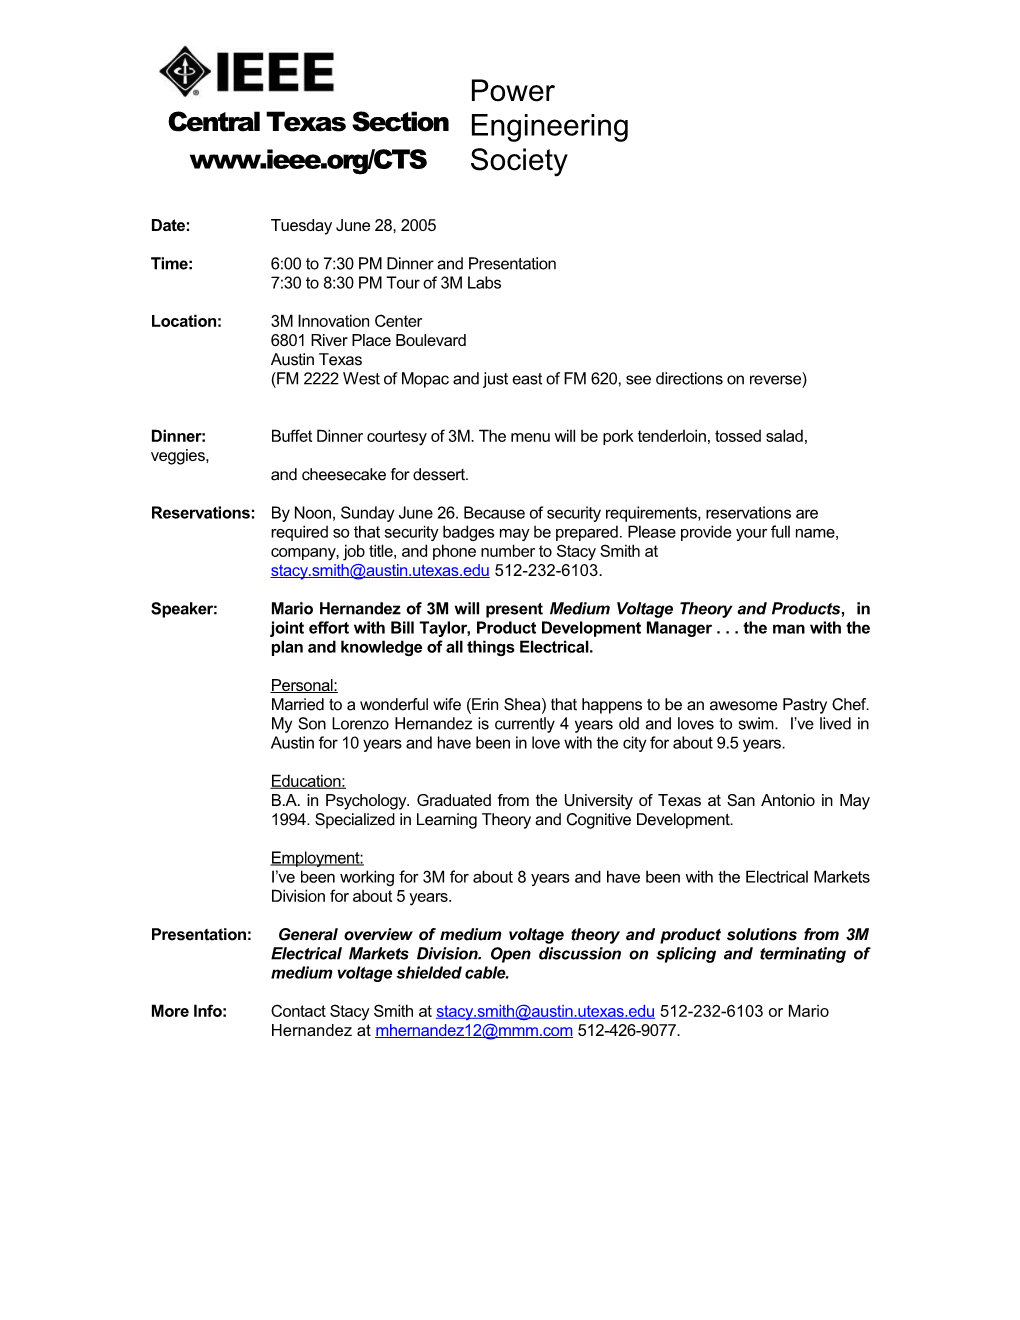 L Page 2 June 28, 2005, IEEE PES Meeting Announcement